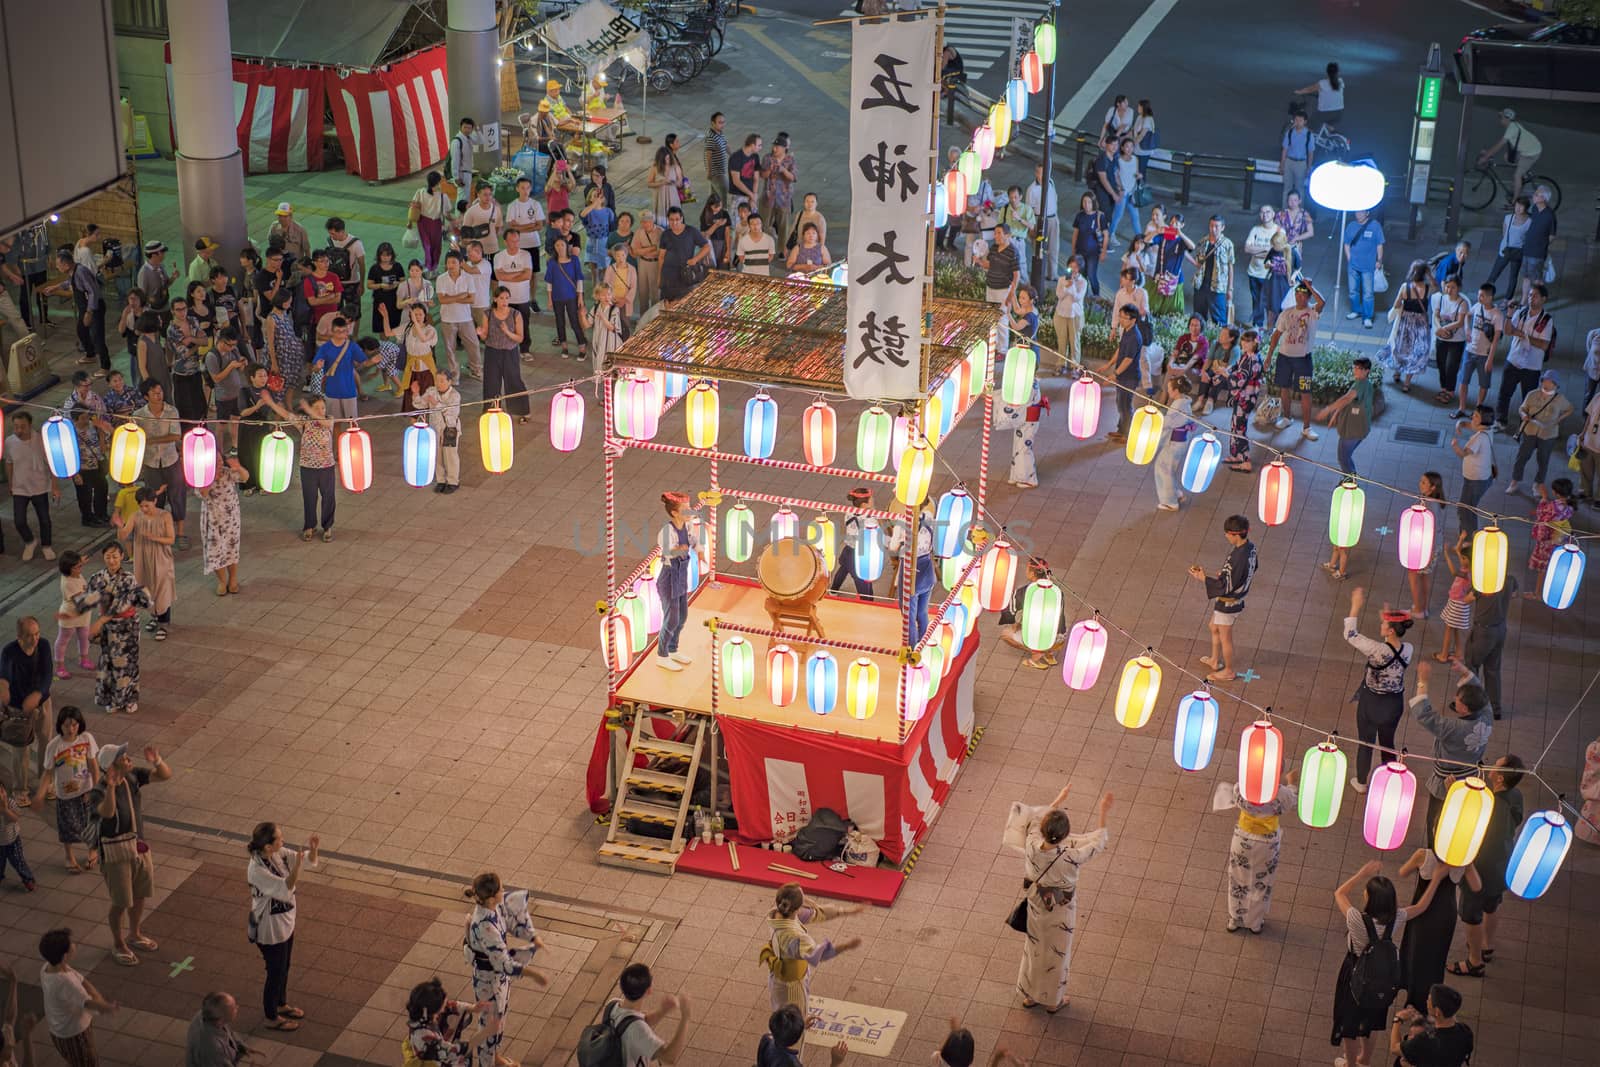 View of the square in front of the Nippori train station decorated for the Obon festival with illuminated paper lanterns  in the summer night with a yagura tower and paper lanterns in the Arakawa district of Tokyo.